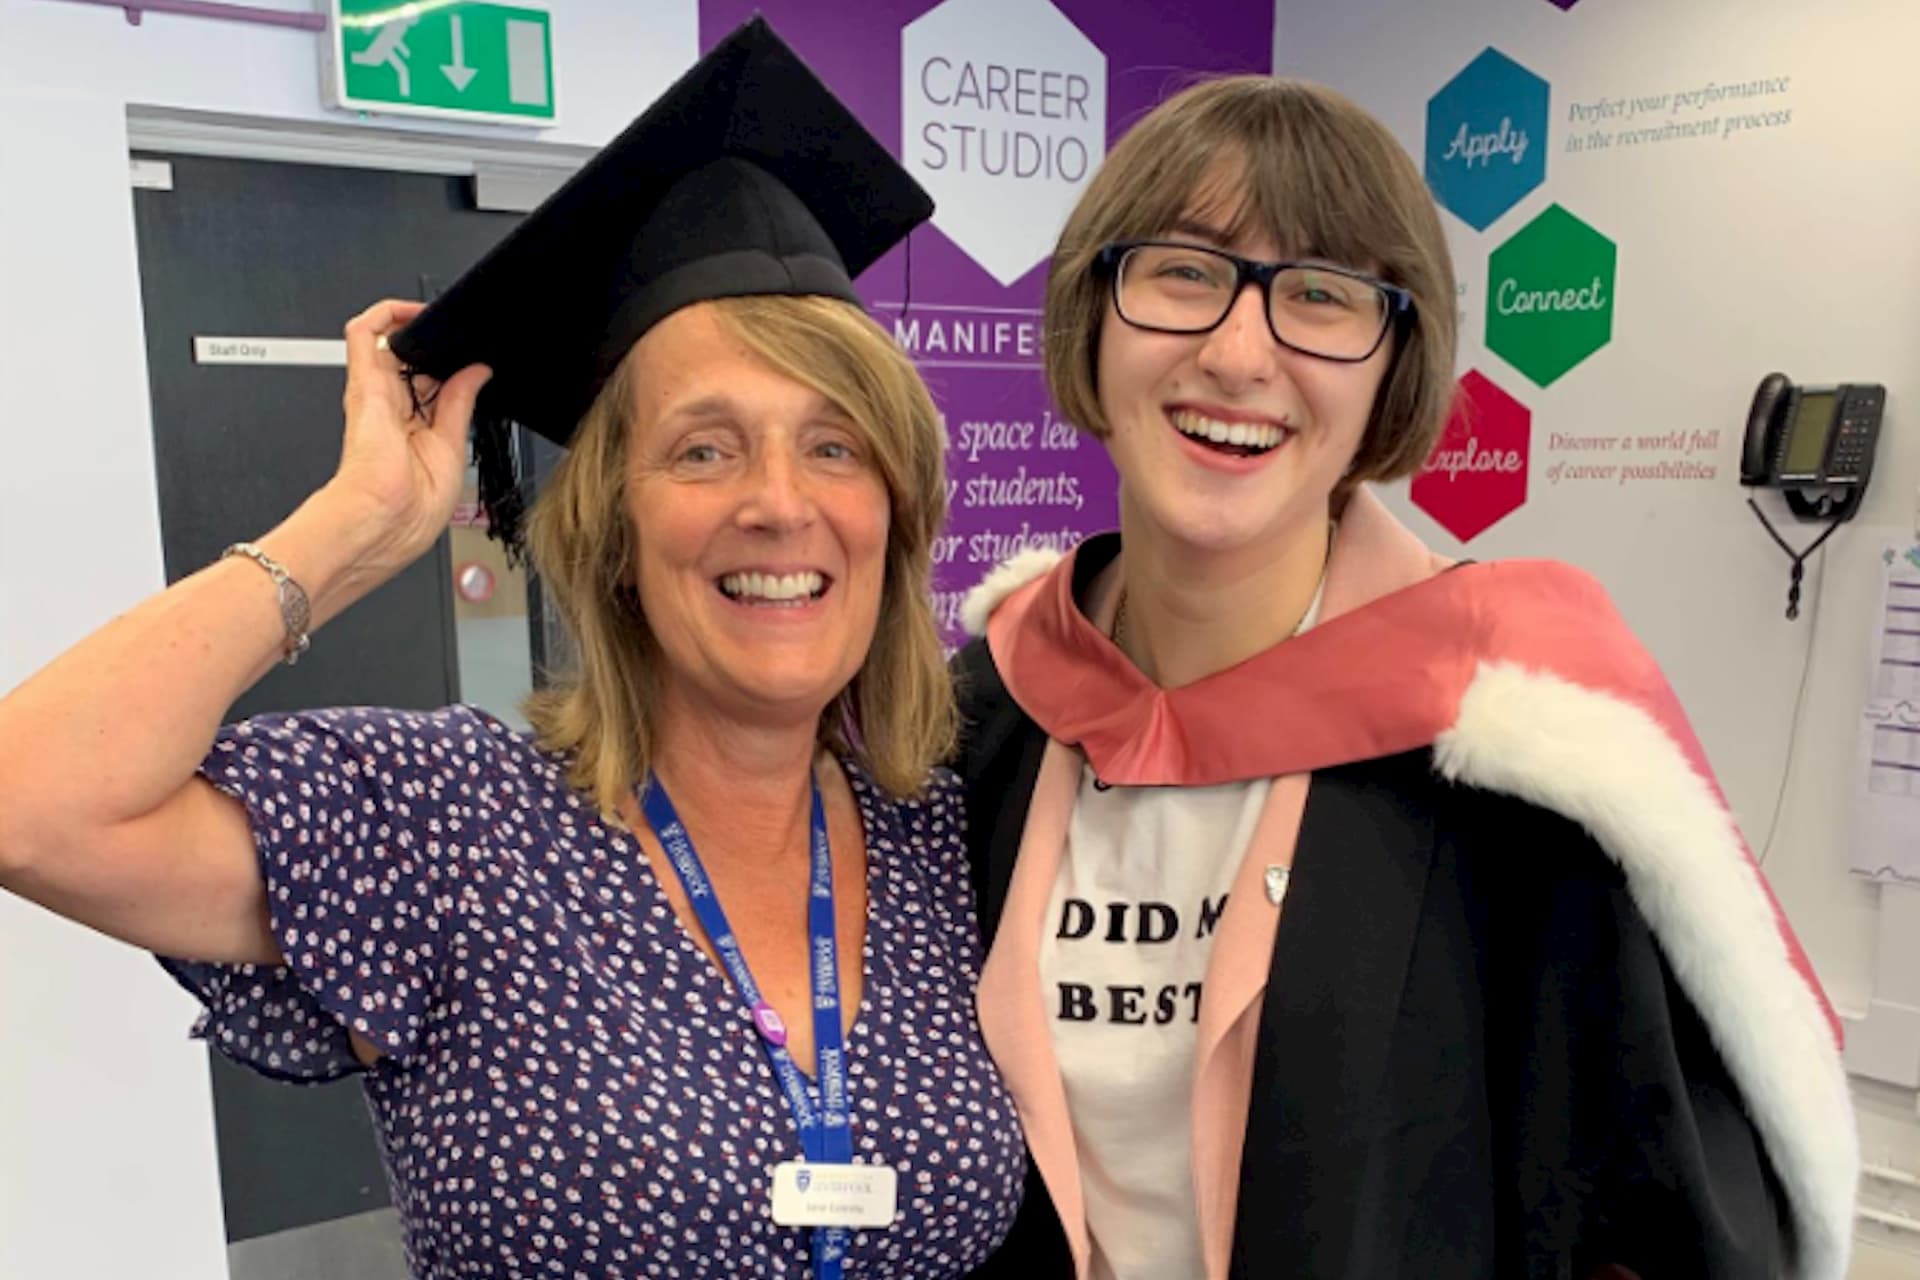 Student celebrating at graduation with careers staff member